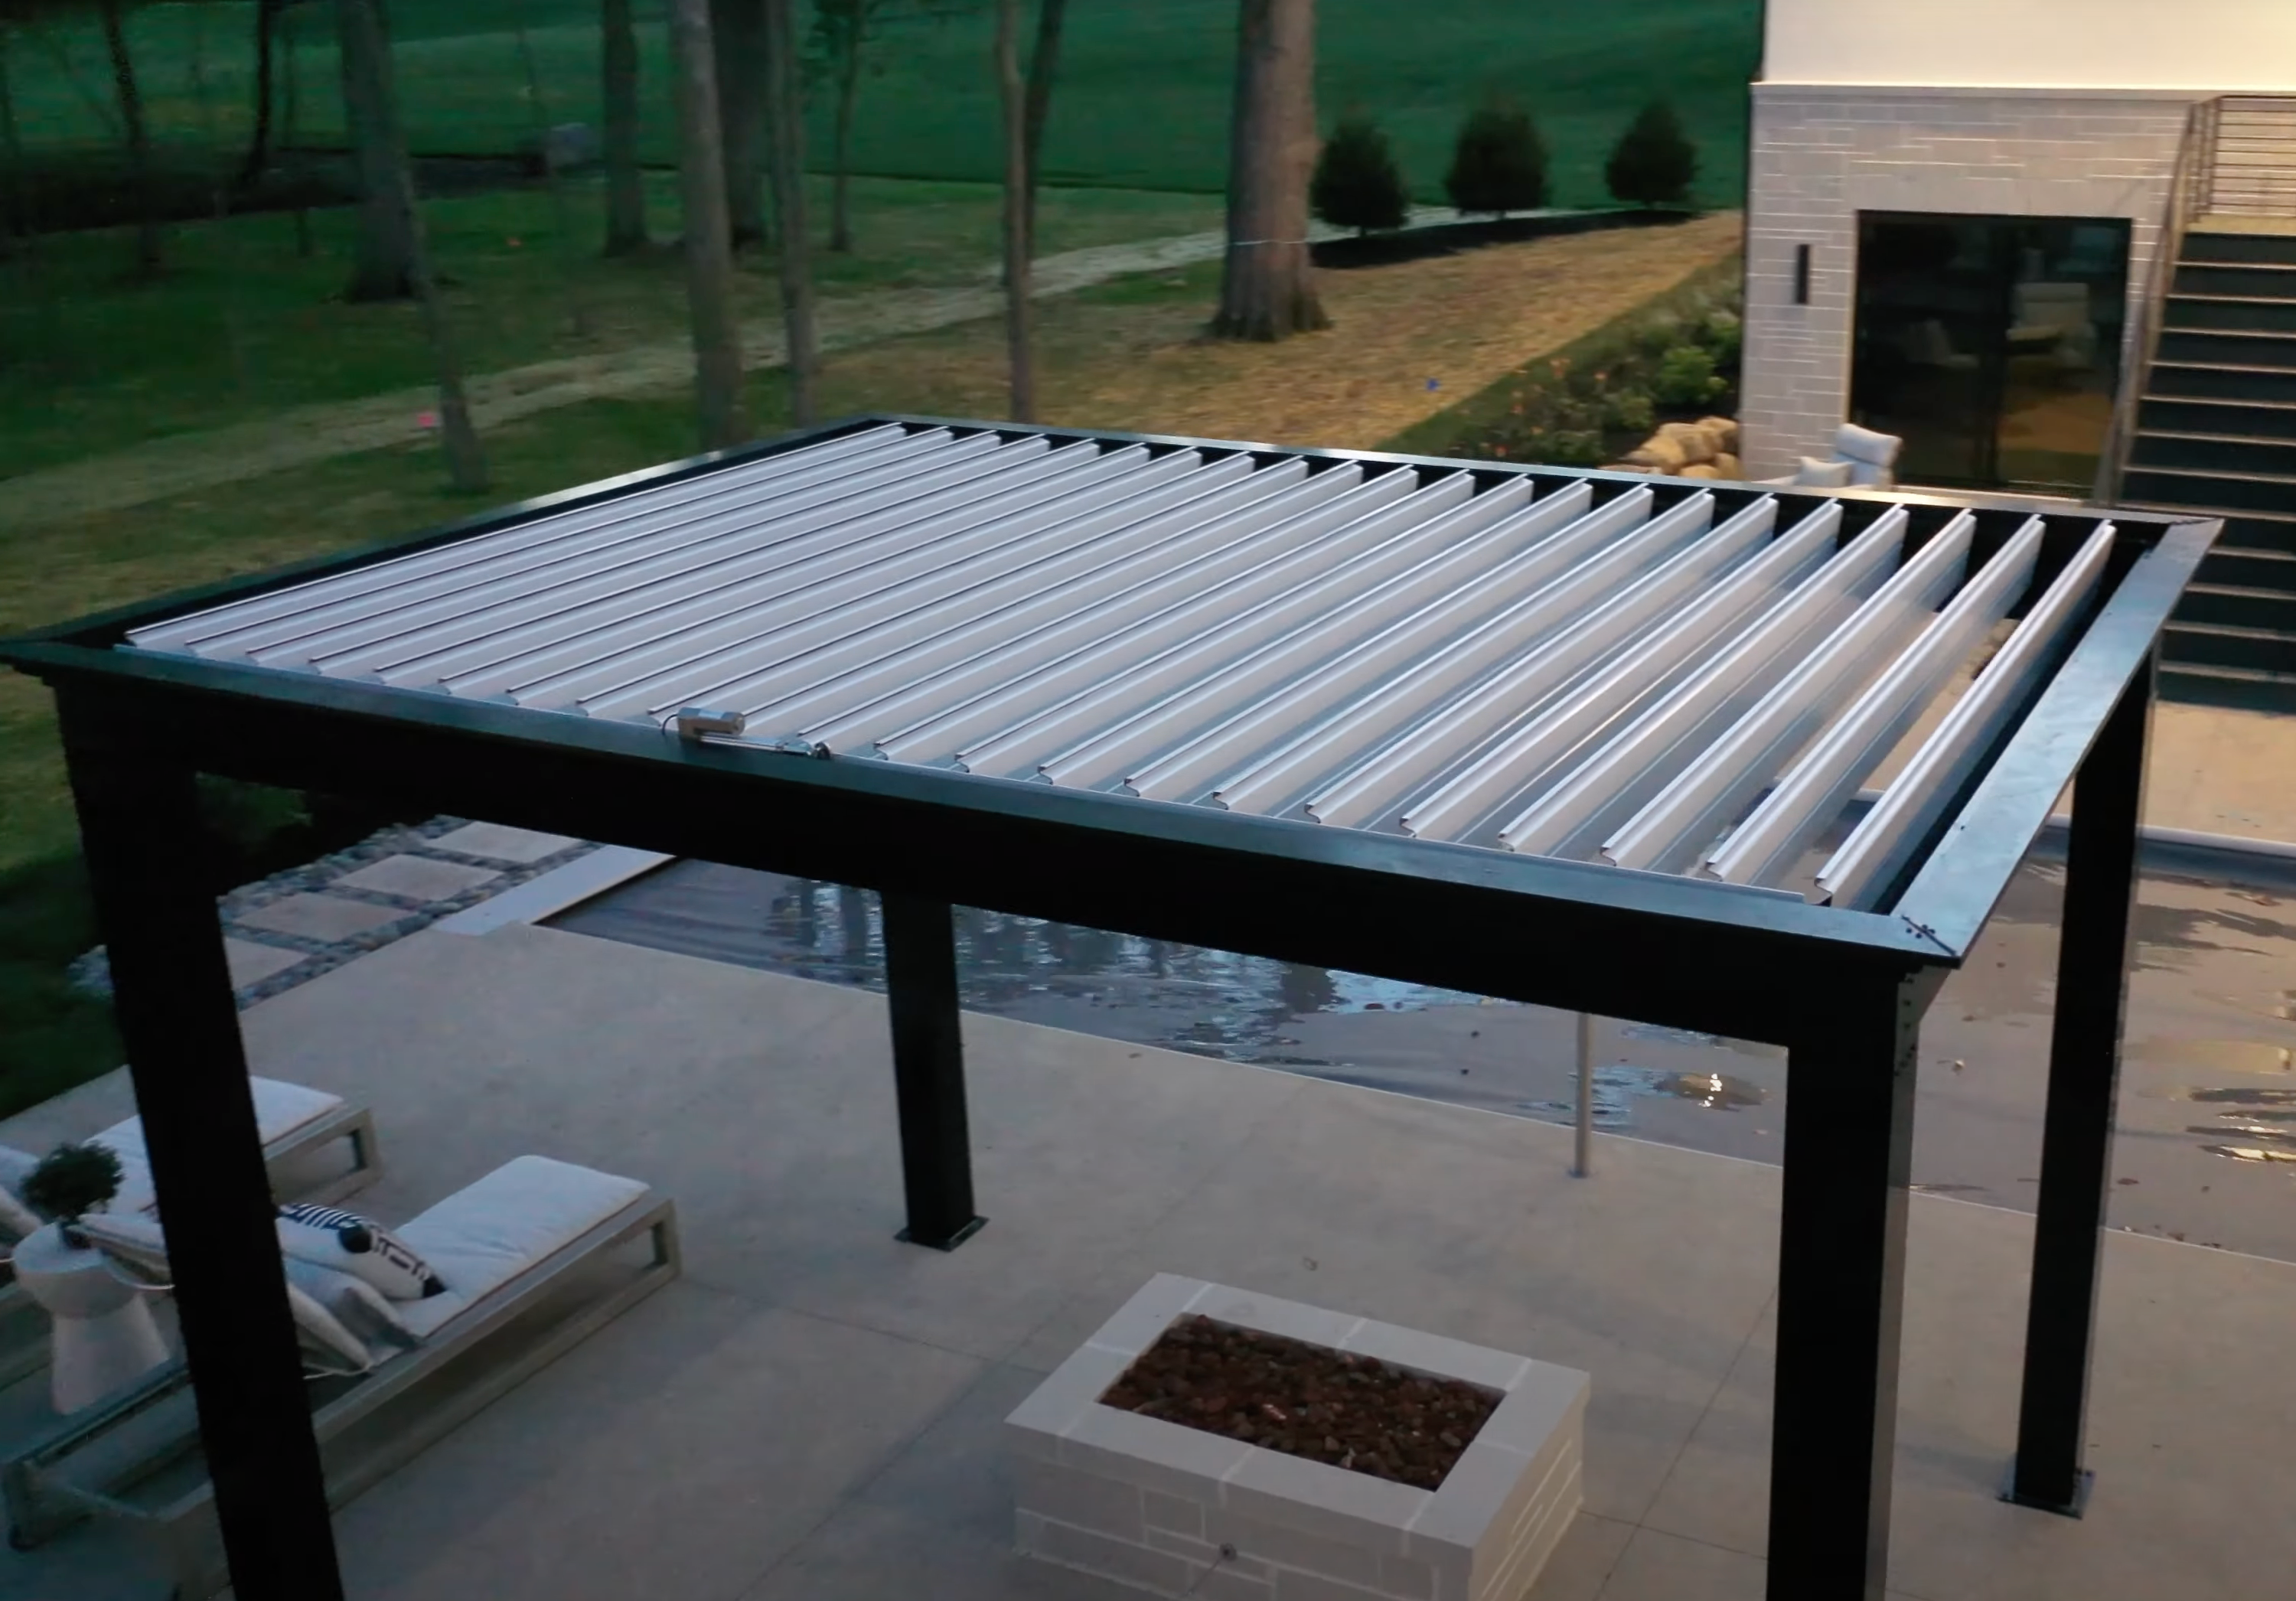 Durable kit with aluminum panels